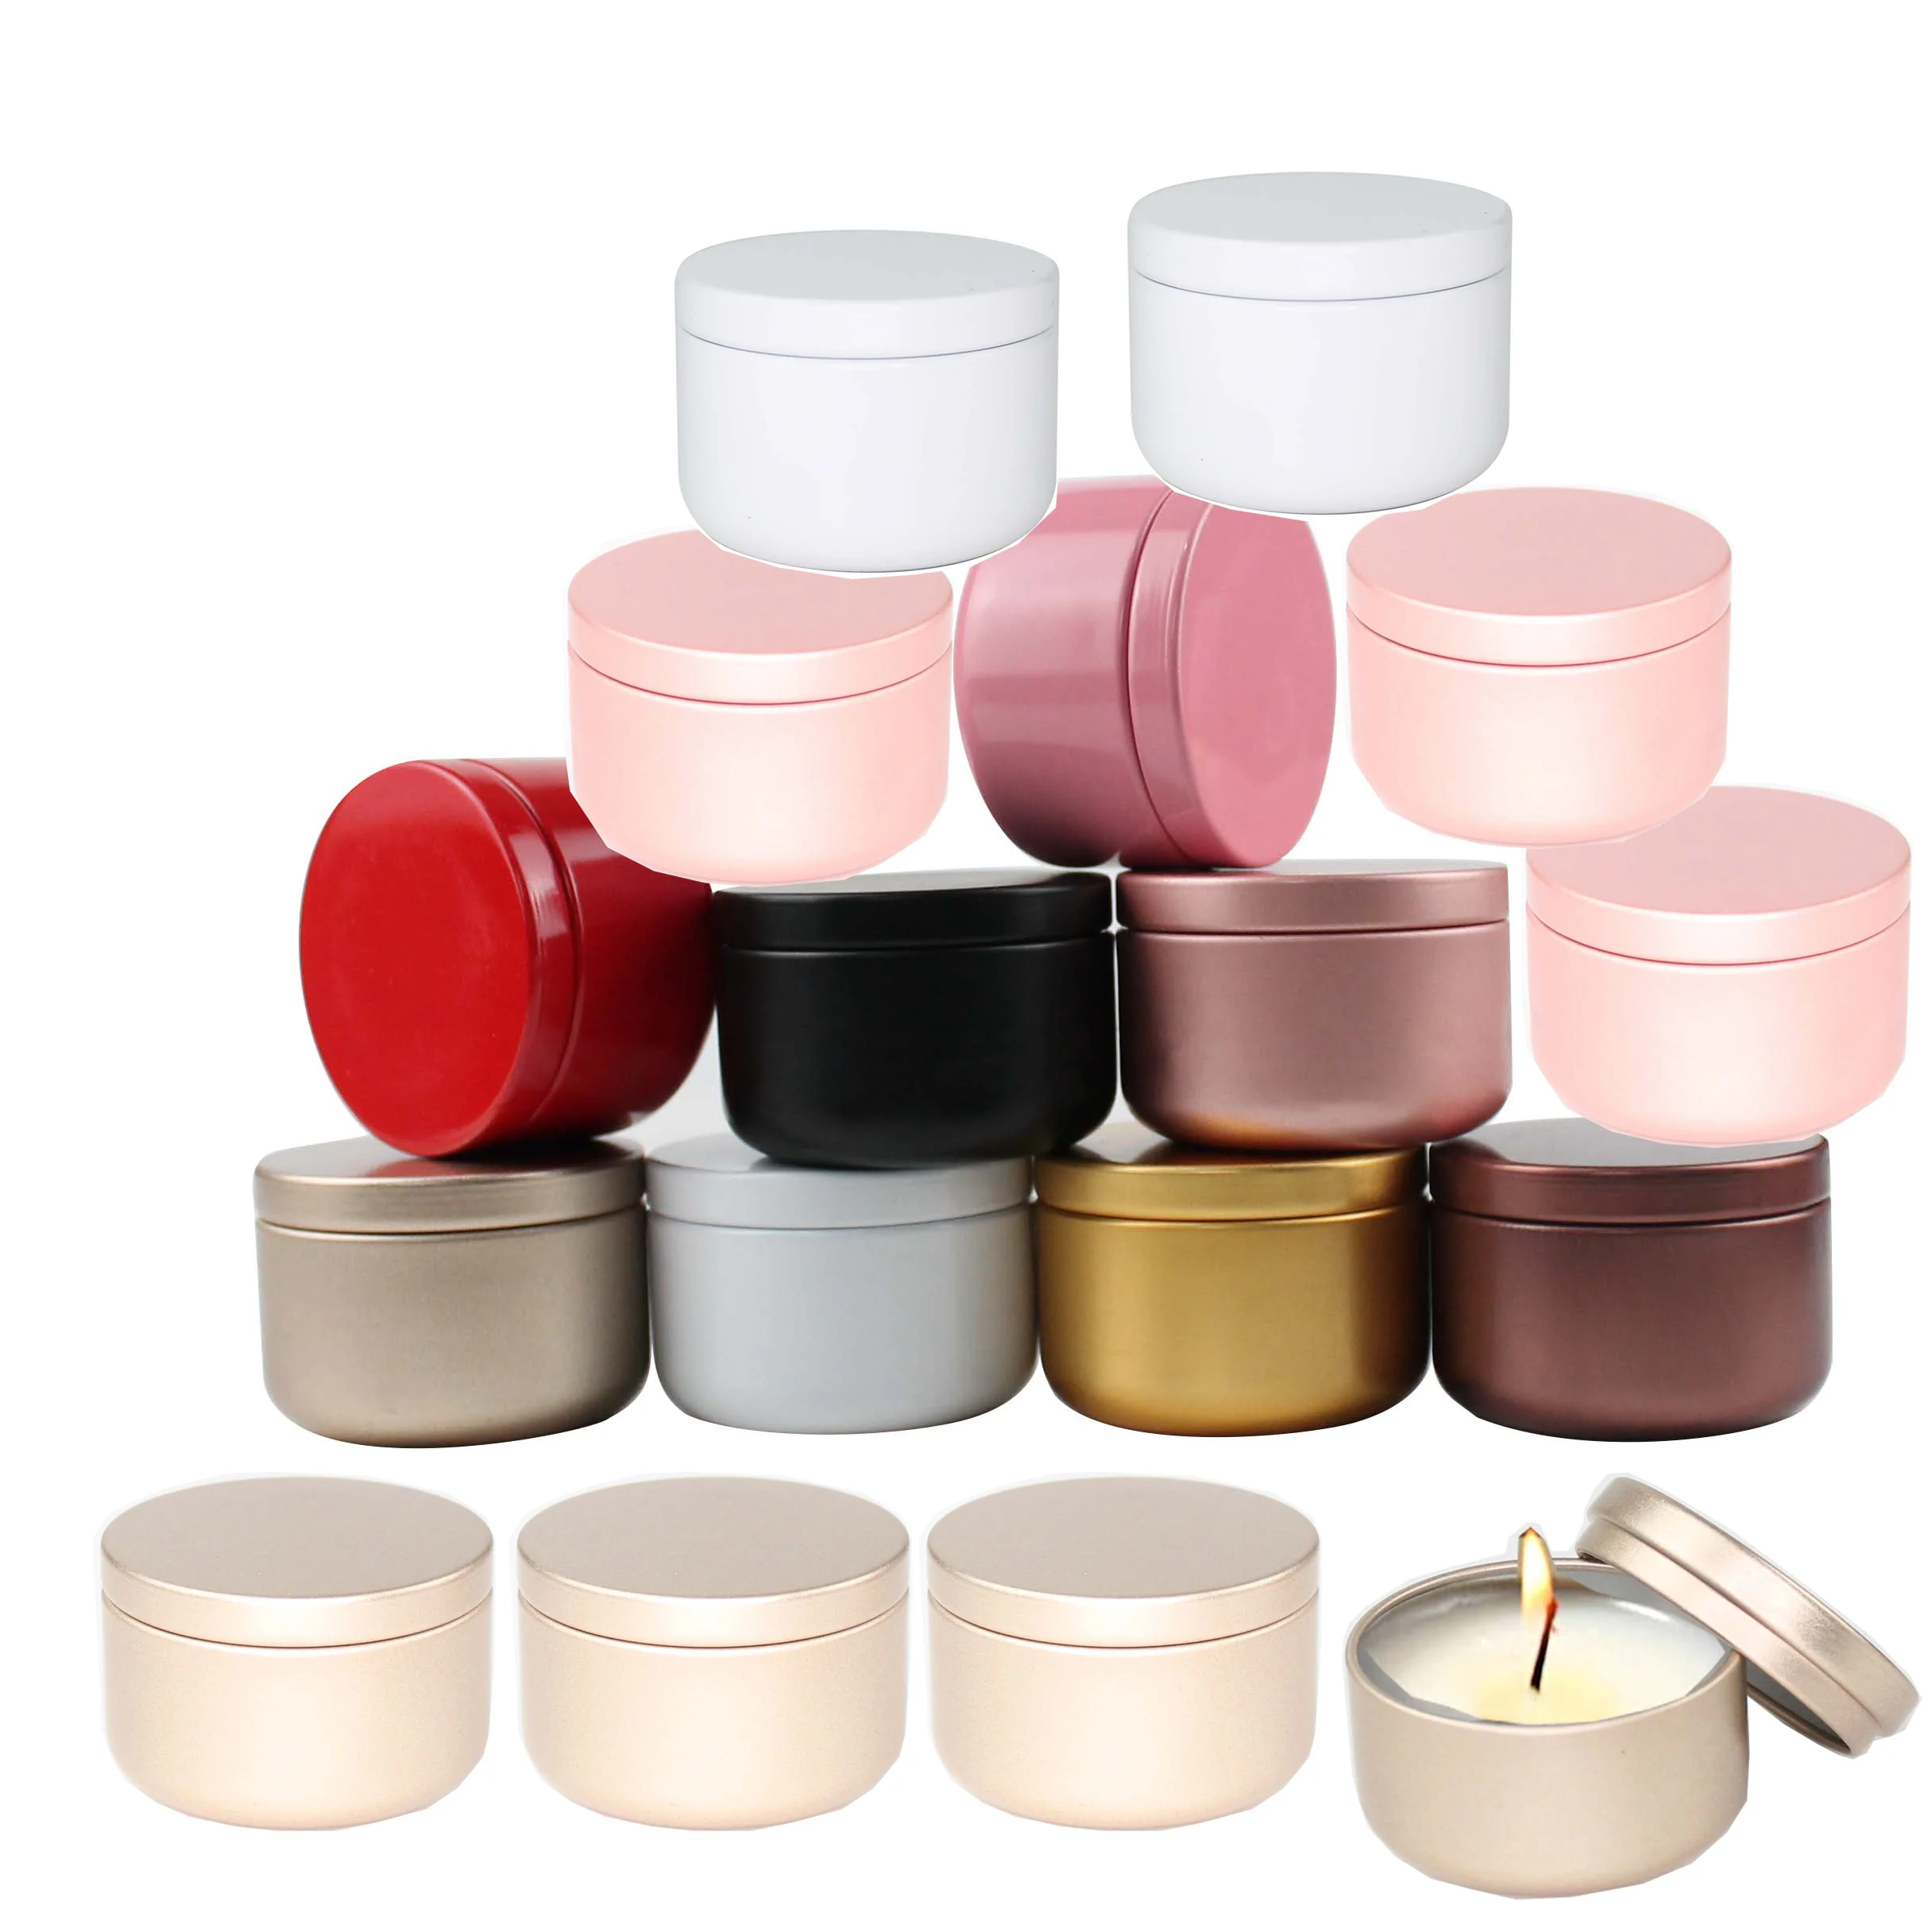 10pcs ksc351j lfs 6 6 3 1 sealed waterproof touch switch original package 20/30/50pcs Aluminum Candle Tin 50ml Round Candle Containers Cosmetic Jars Oil Cream Pot Empty Aromatherapy Sealed Metal Can